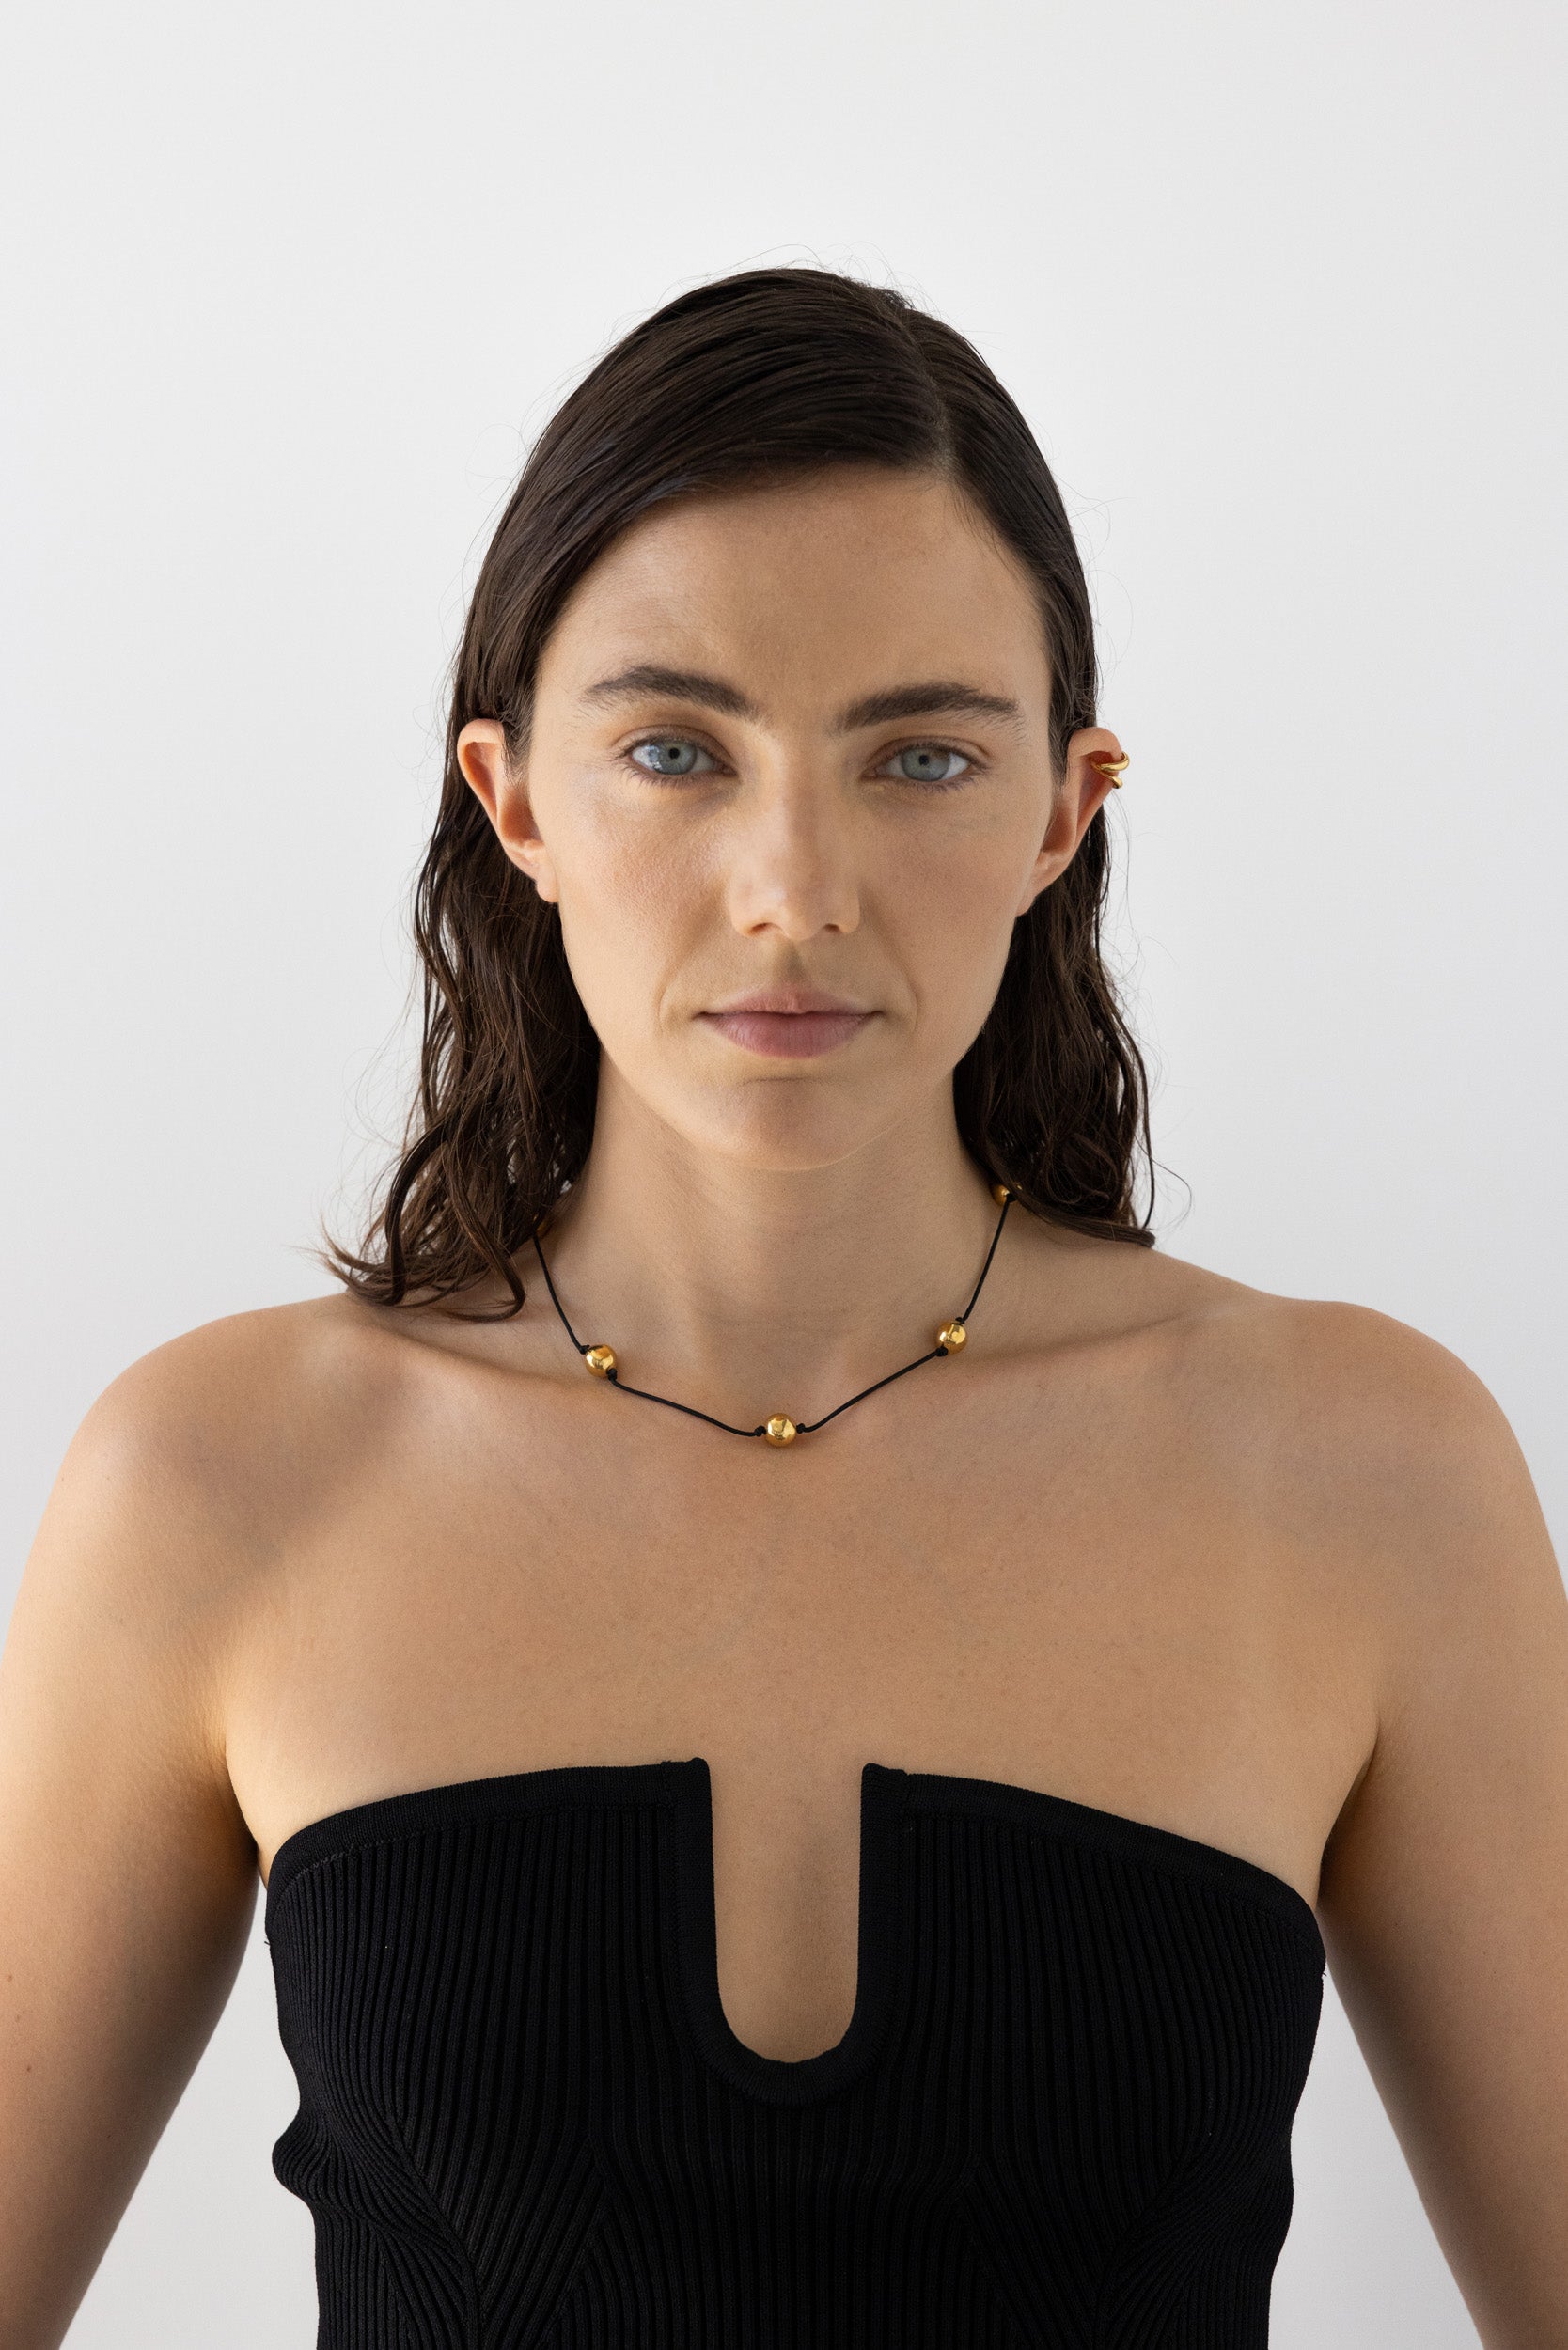 Knotted Necklace - Gold